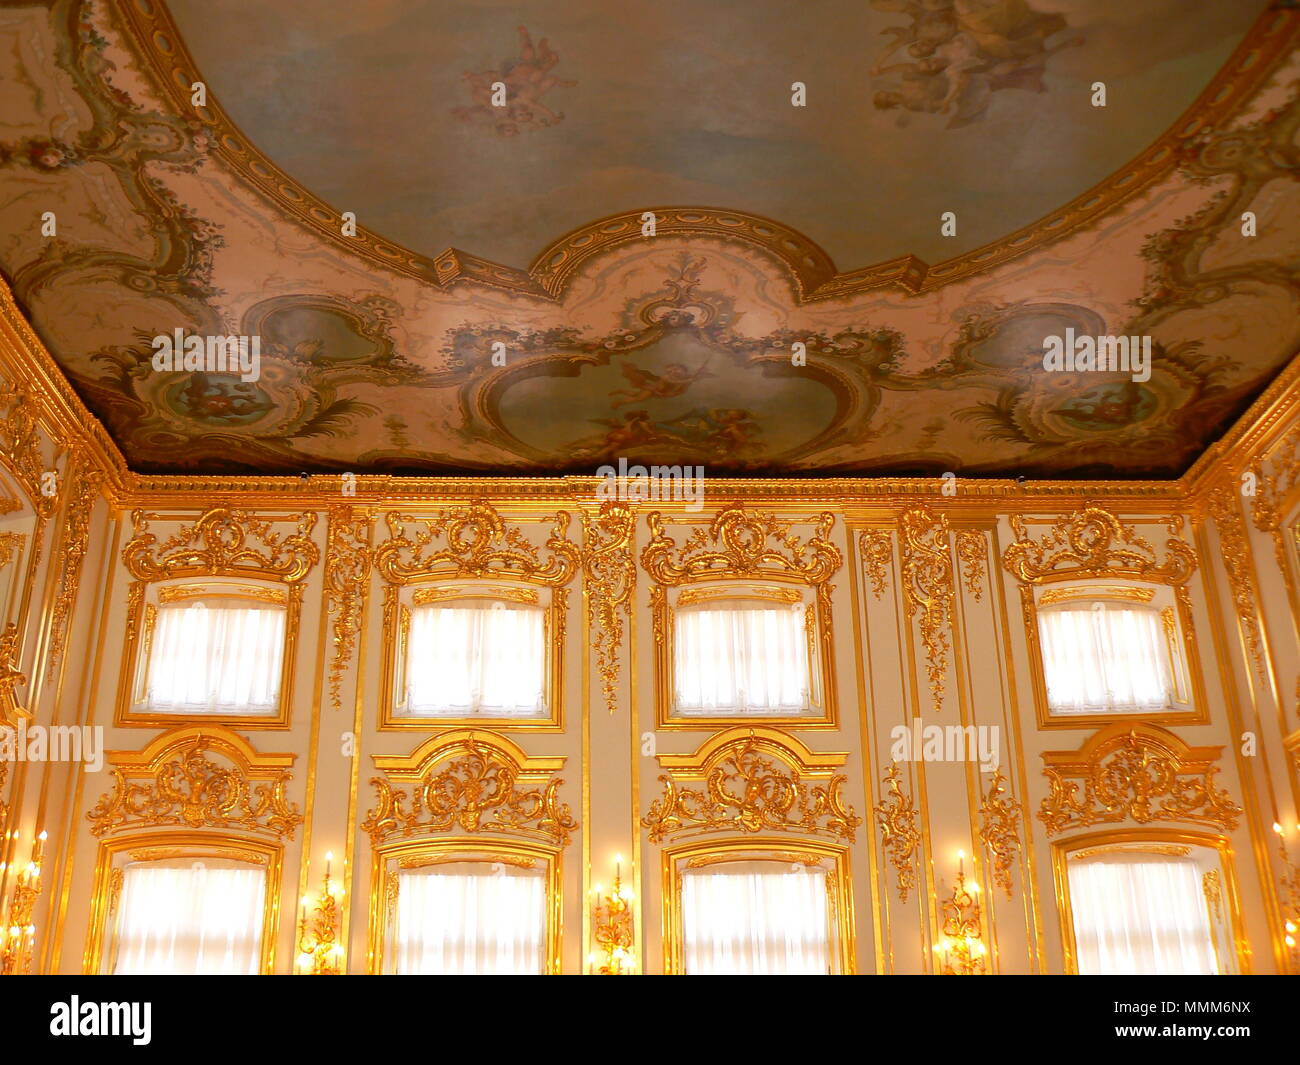 The magnificent interior of the Catherine Palace Ballroom in Tsarskoe ...